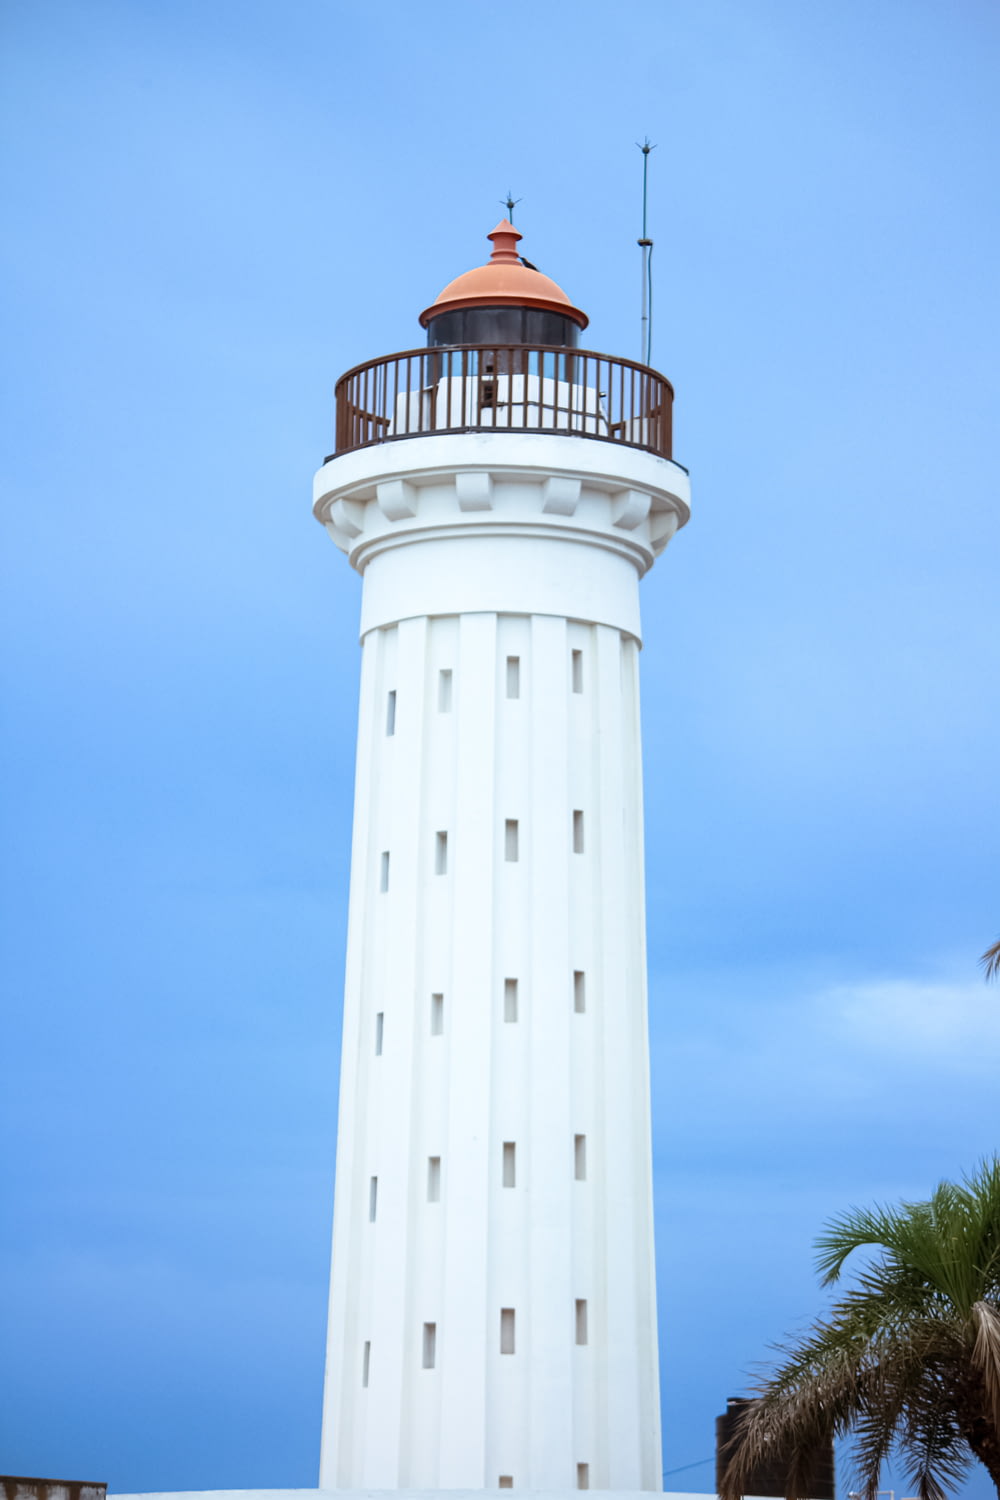 a tall white tower with a red top